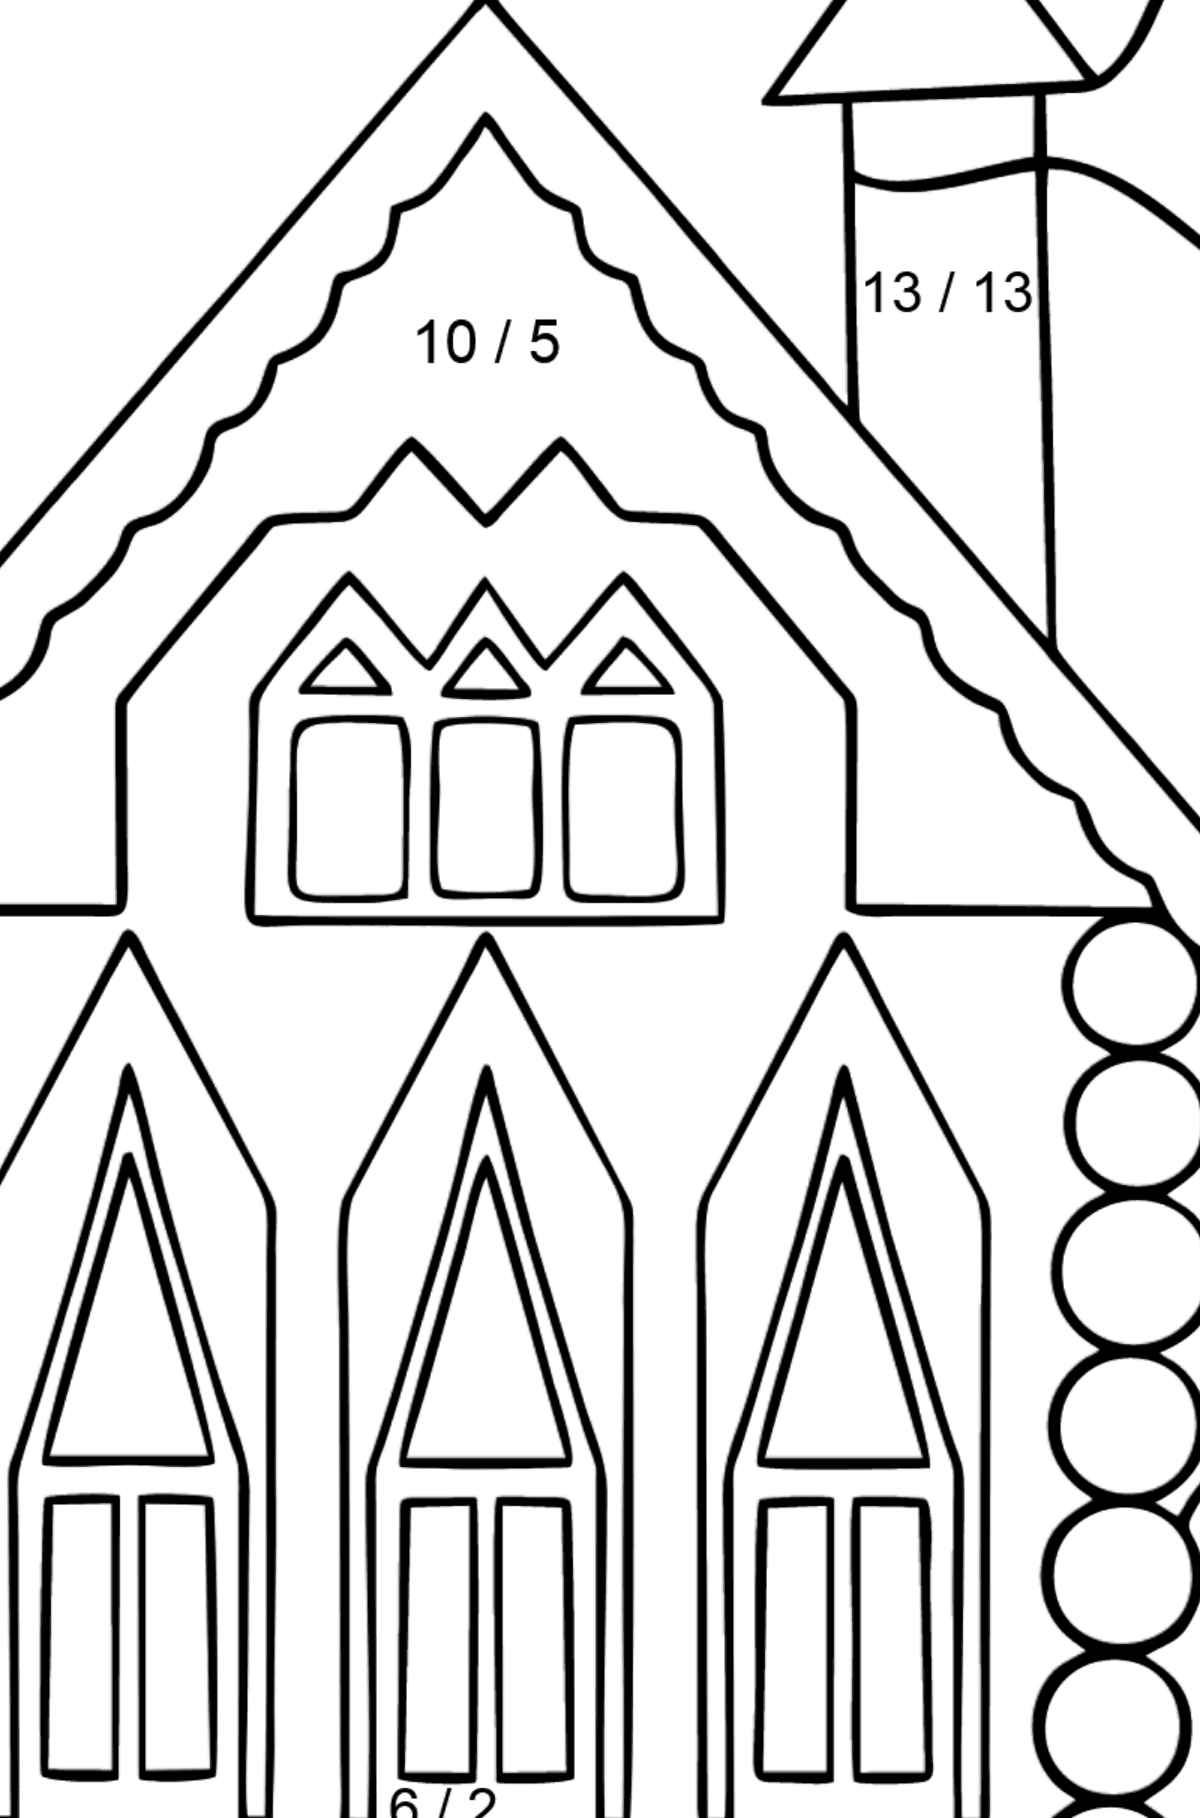 Simple Coloring Page - A Rainbow House - Math Coloring - Division for Kids